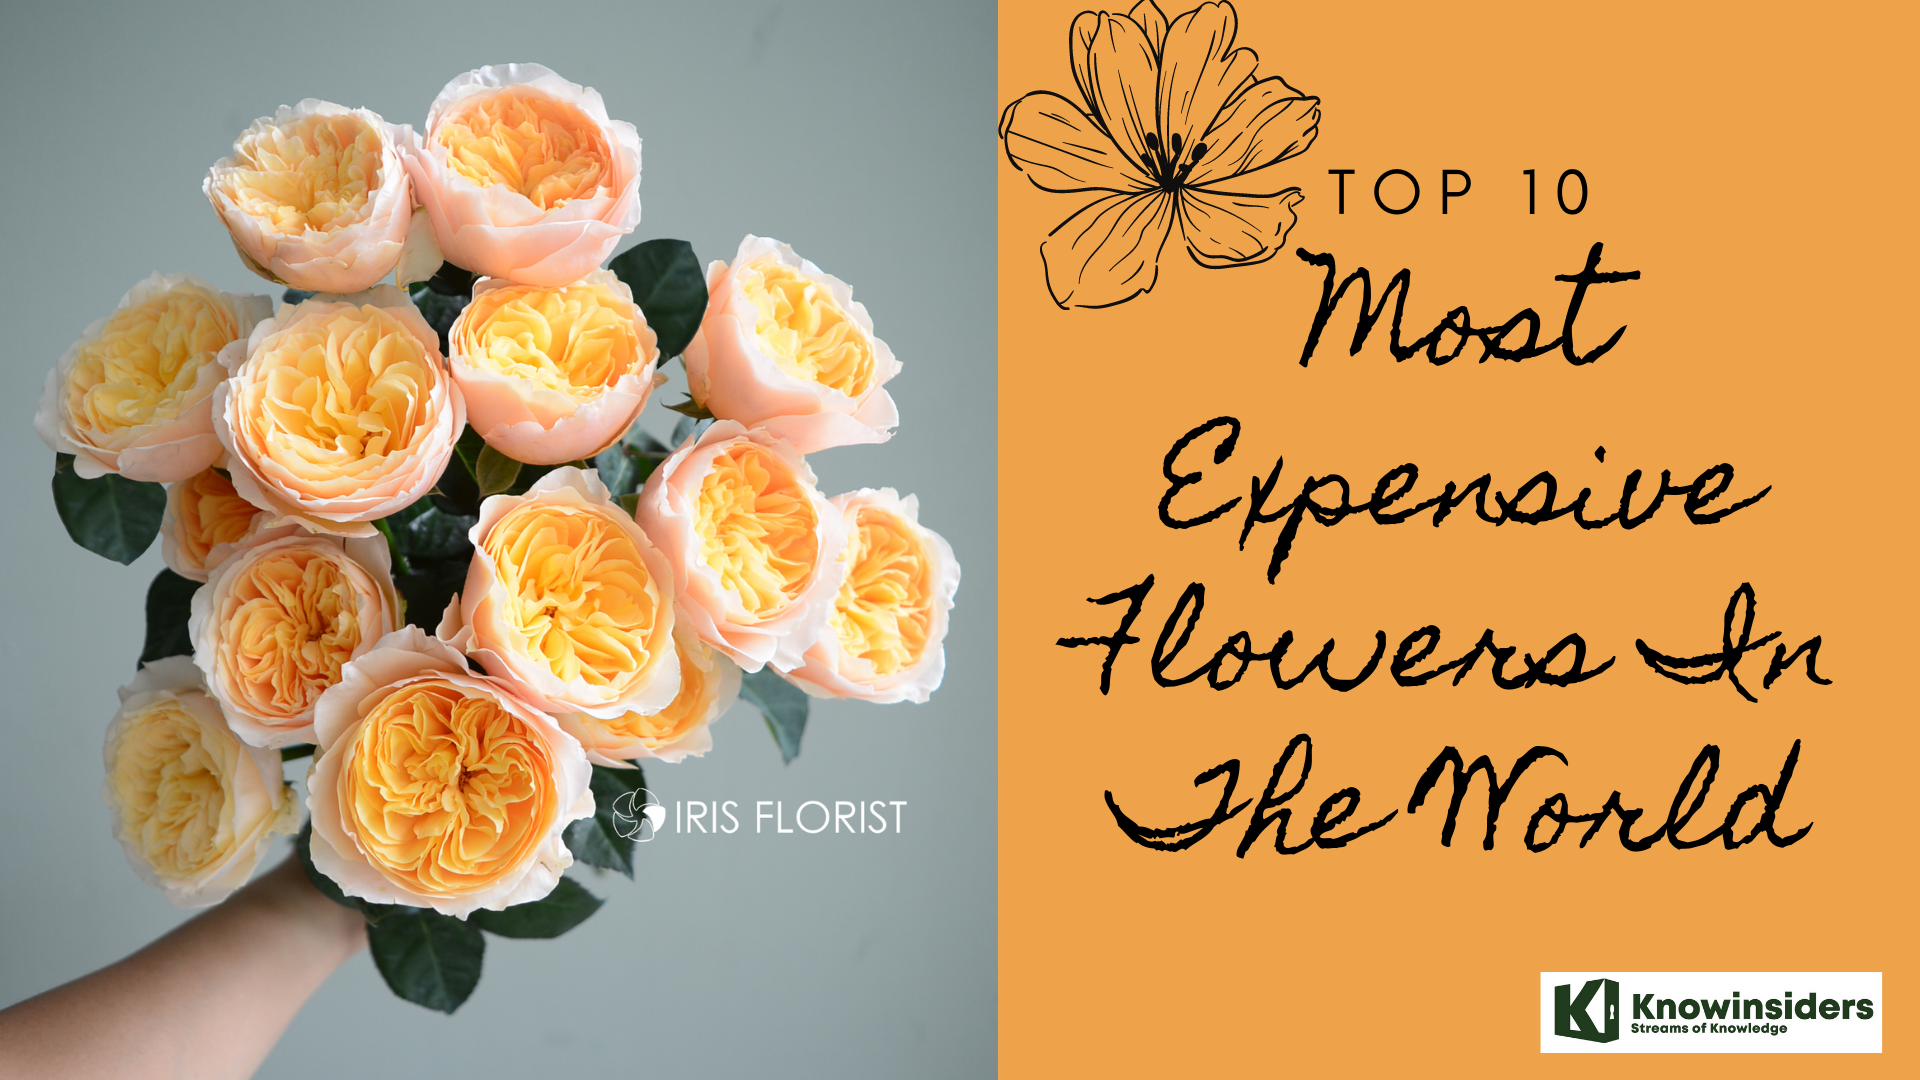 Top 10 Most Expensive Flowers in the World